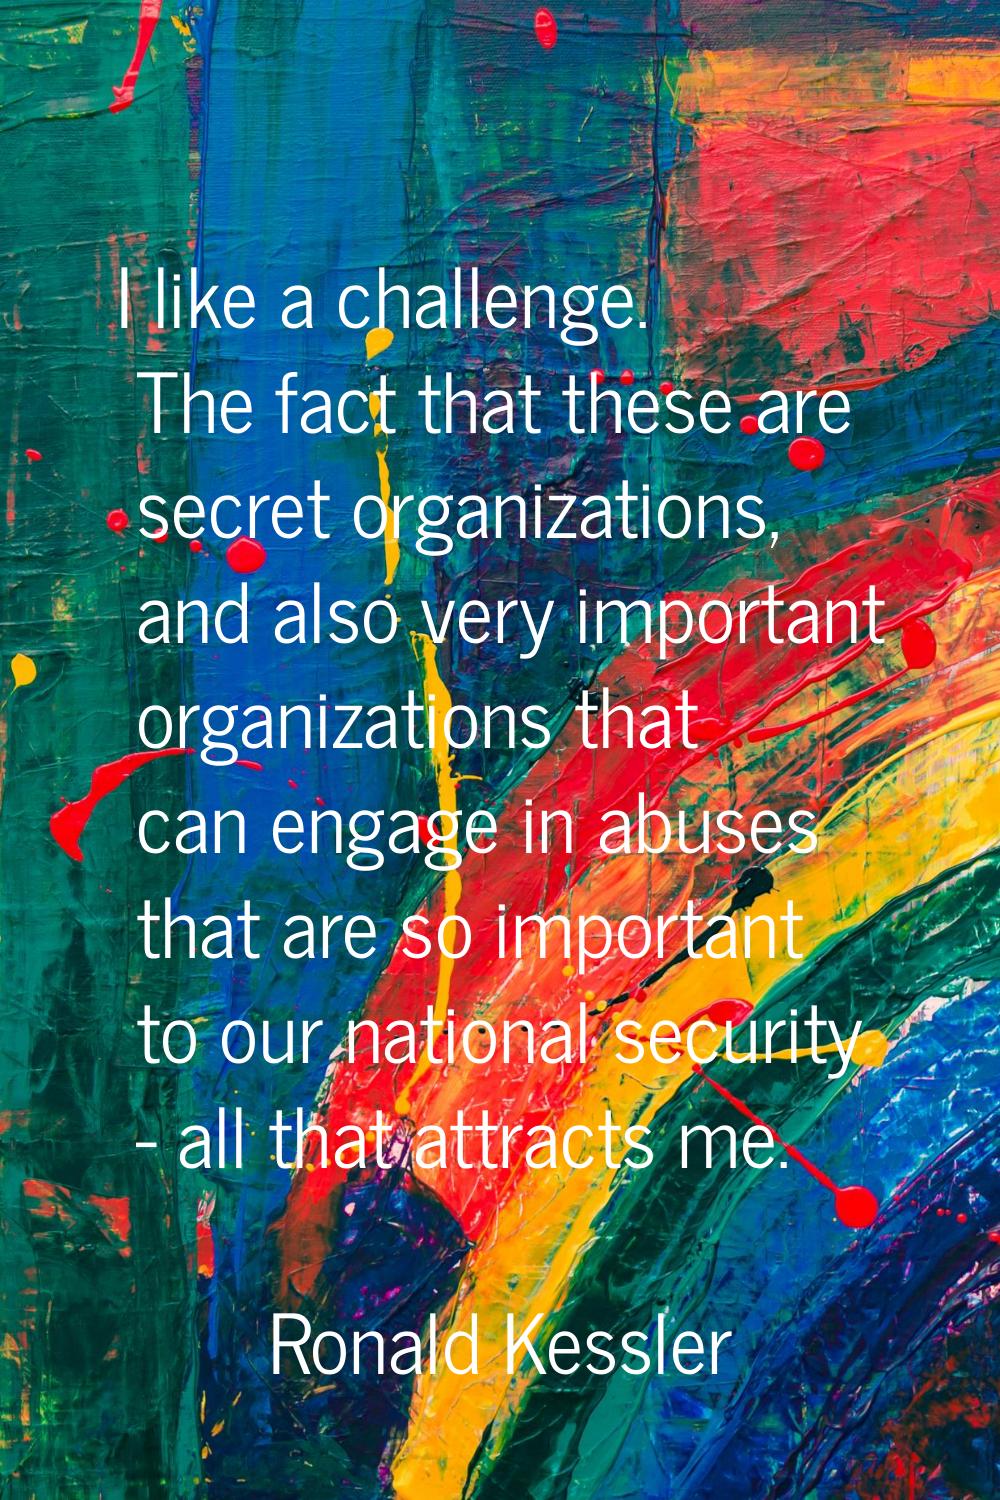 I like a challenge. The fact that these are secret organizations, and also very important organizat